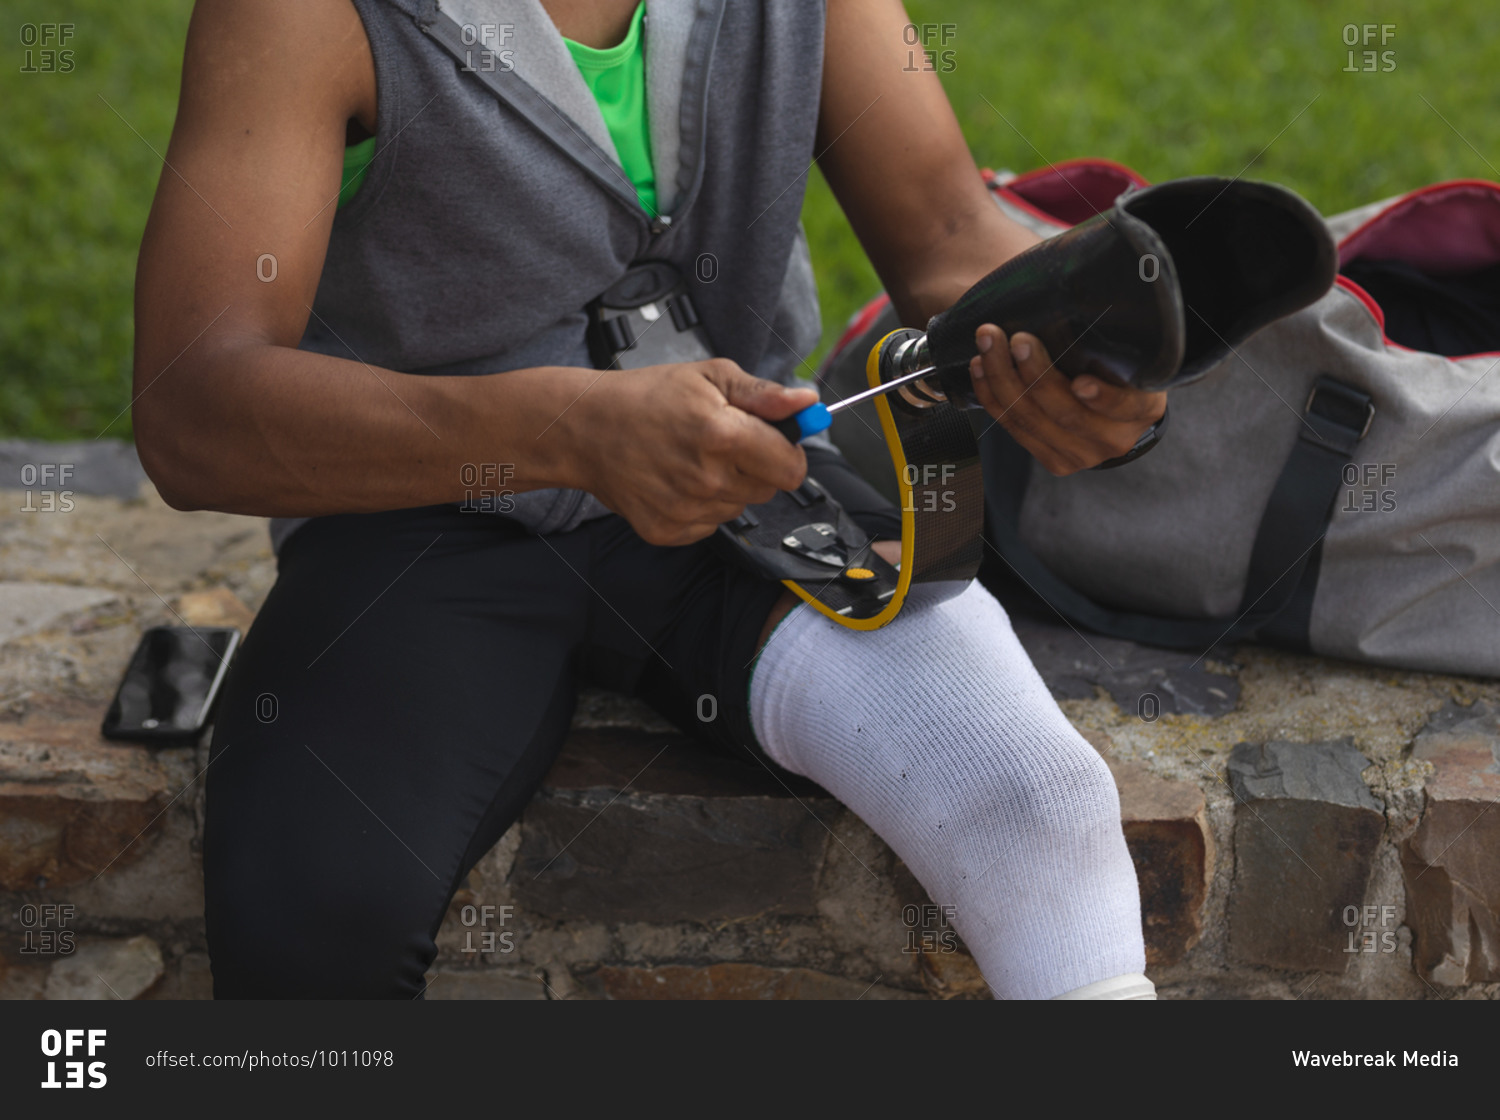 Mid section of a disabled mixed race man with a prosthetic leg working out in an urban park, sitting on a wall and fitting a running blade. Fitness disability healthy lifestyle.